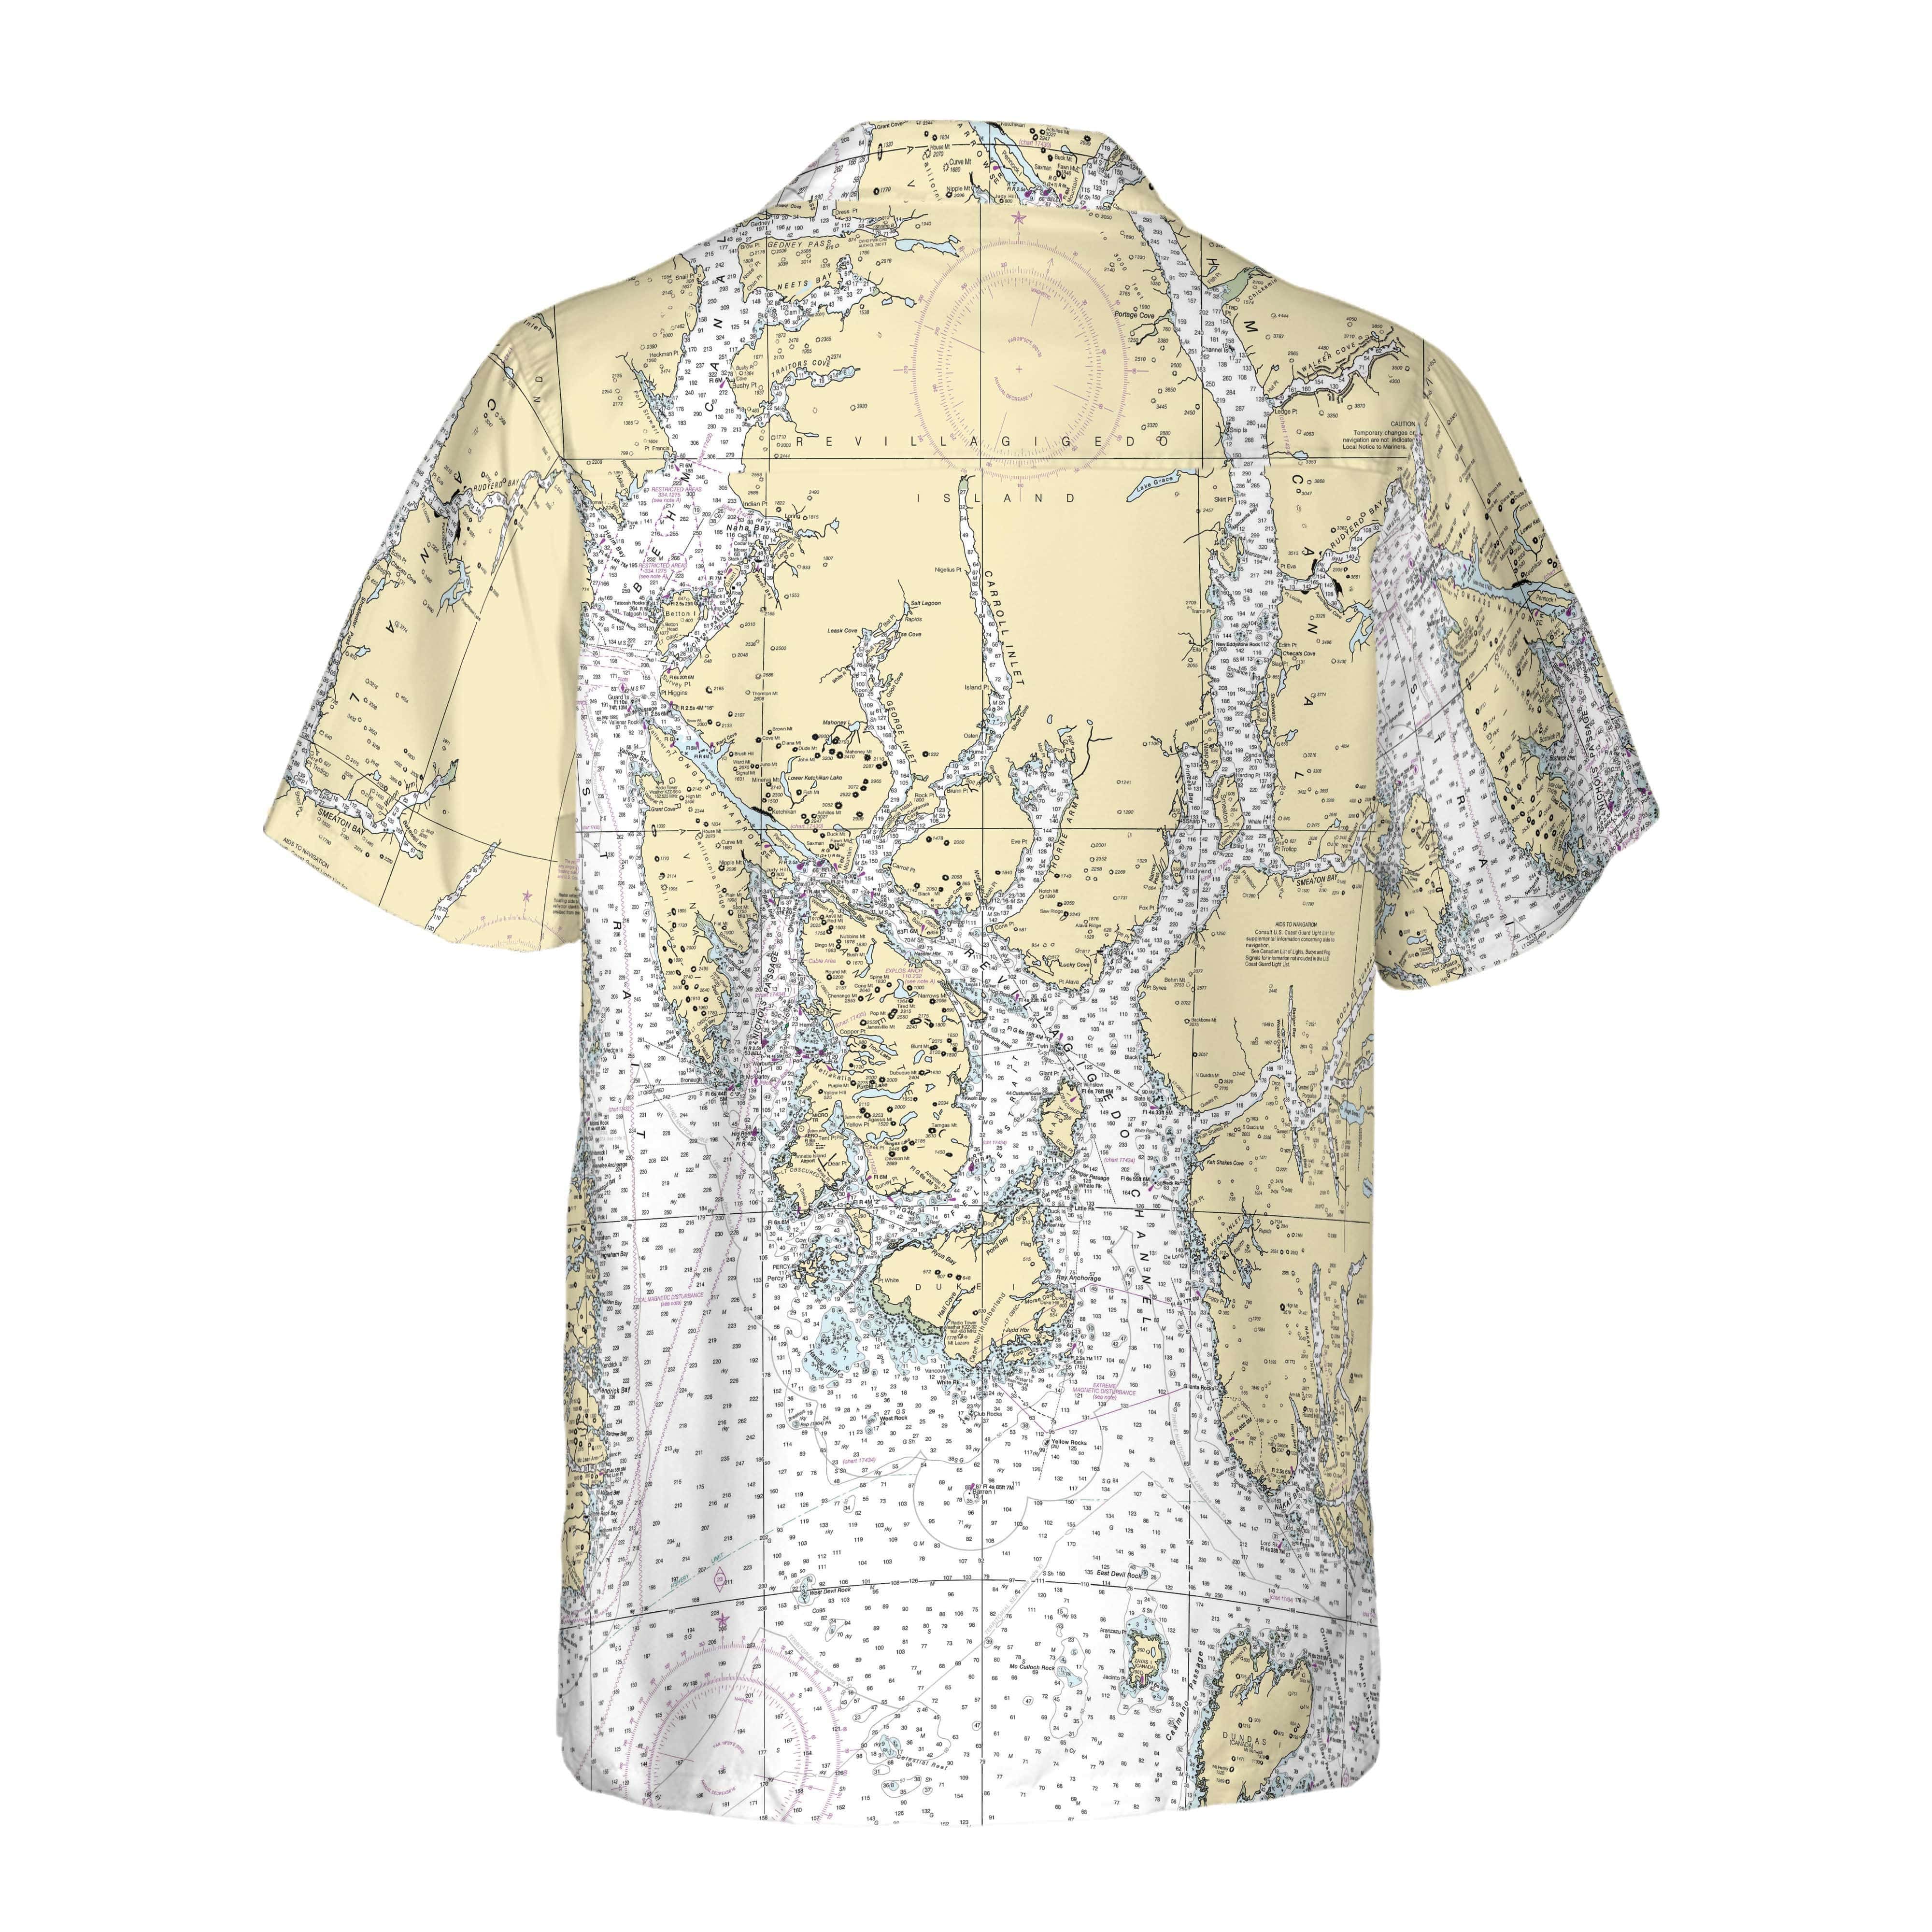 The Ketchikan Coconut Button Camp Shirt